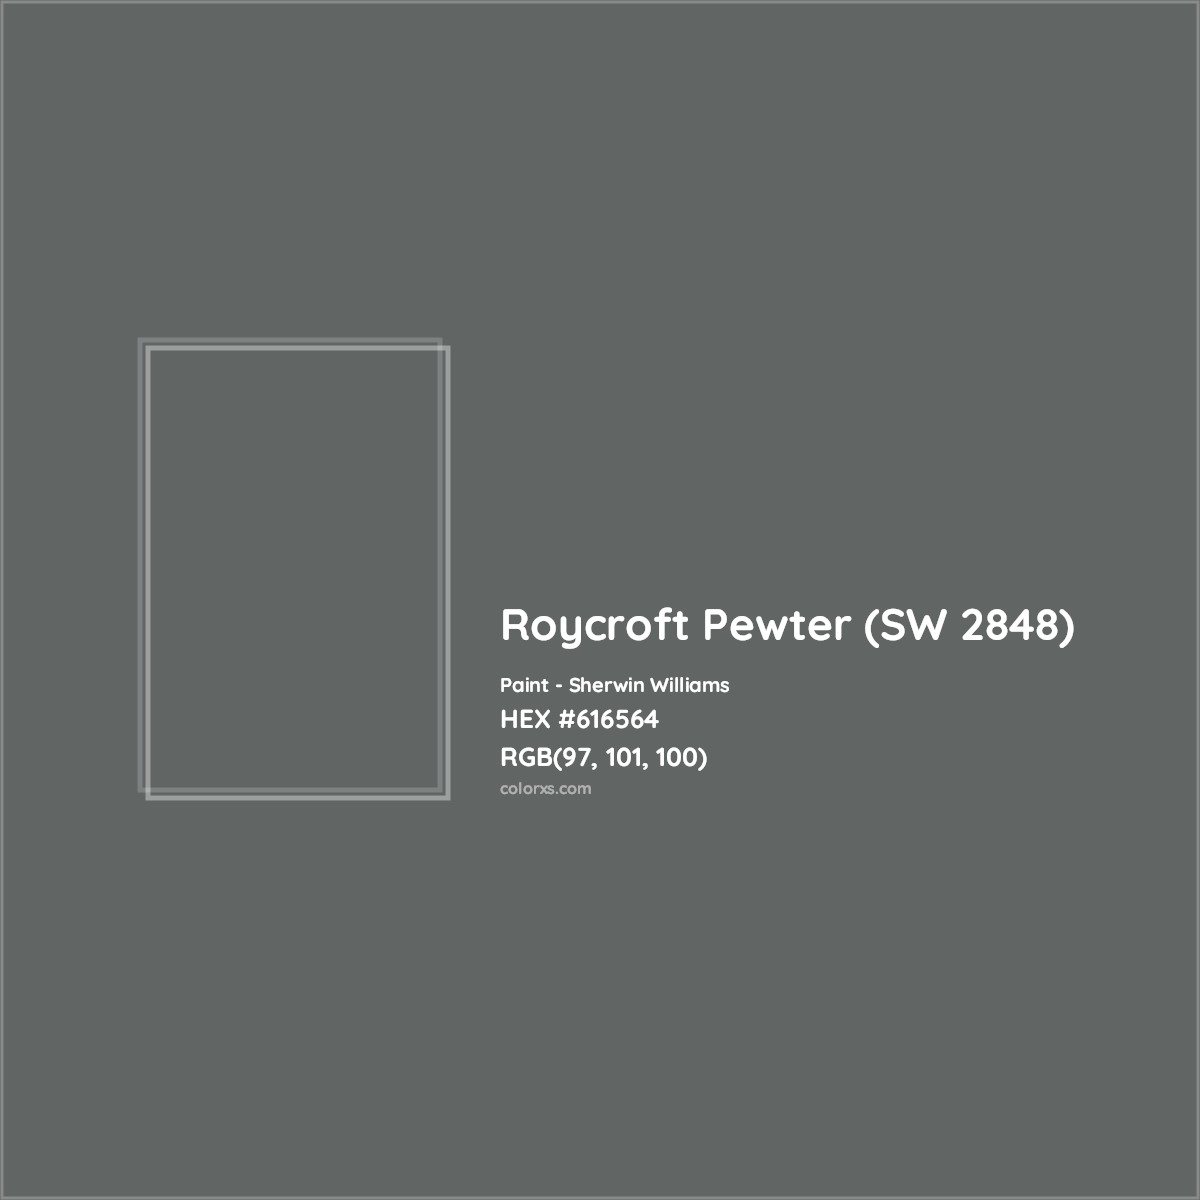 HEX #616564 Roycroft Pewter (SW 2848) Paint Sherwin Williams - Color Code